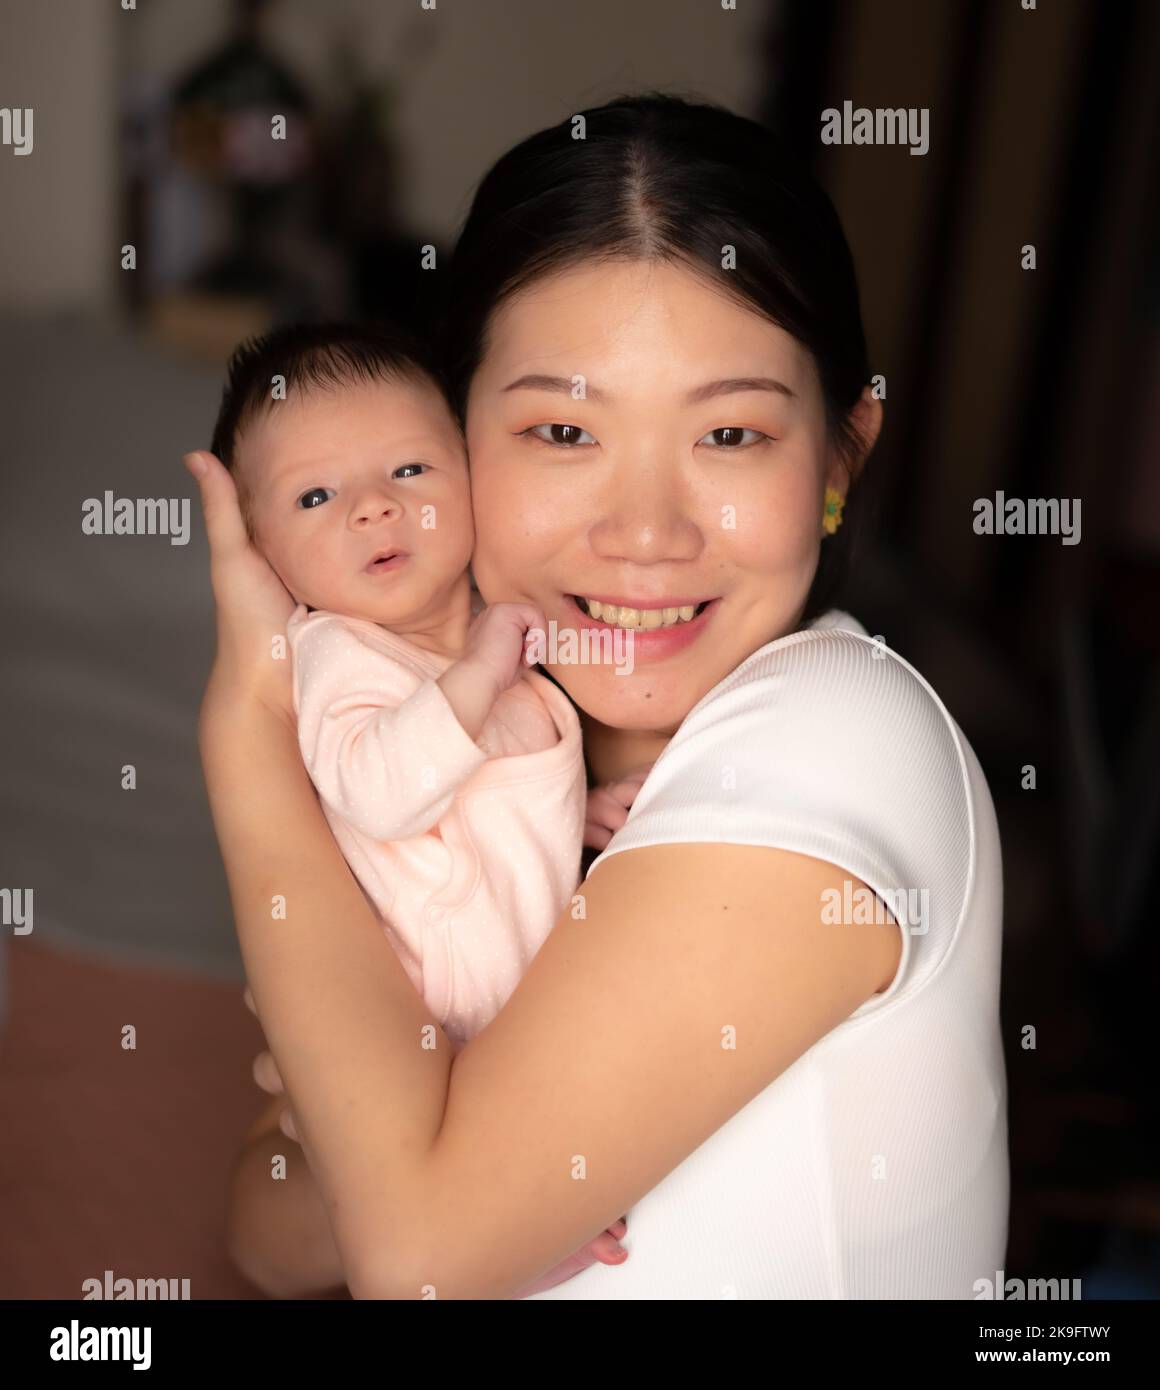 lifestyle shot on young and happy Asian Chinese woman holding tenderly her adorable newborn baby girl in her arms in mother and daughter love and care Stock Photo